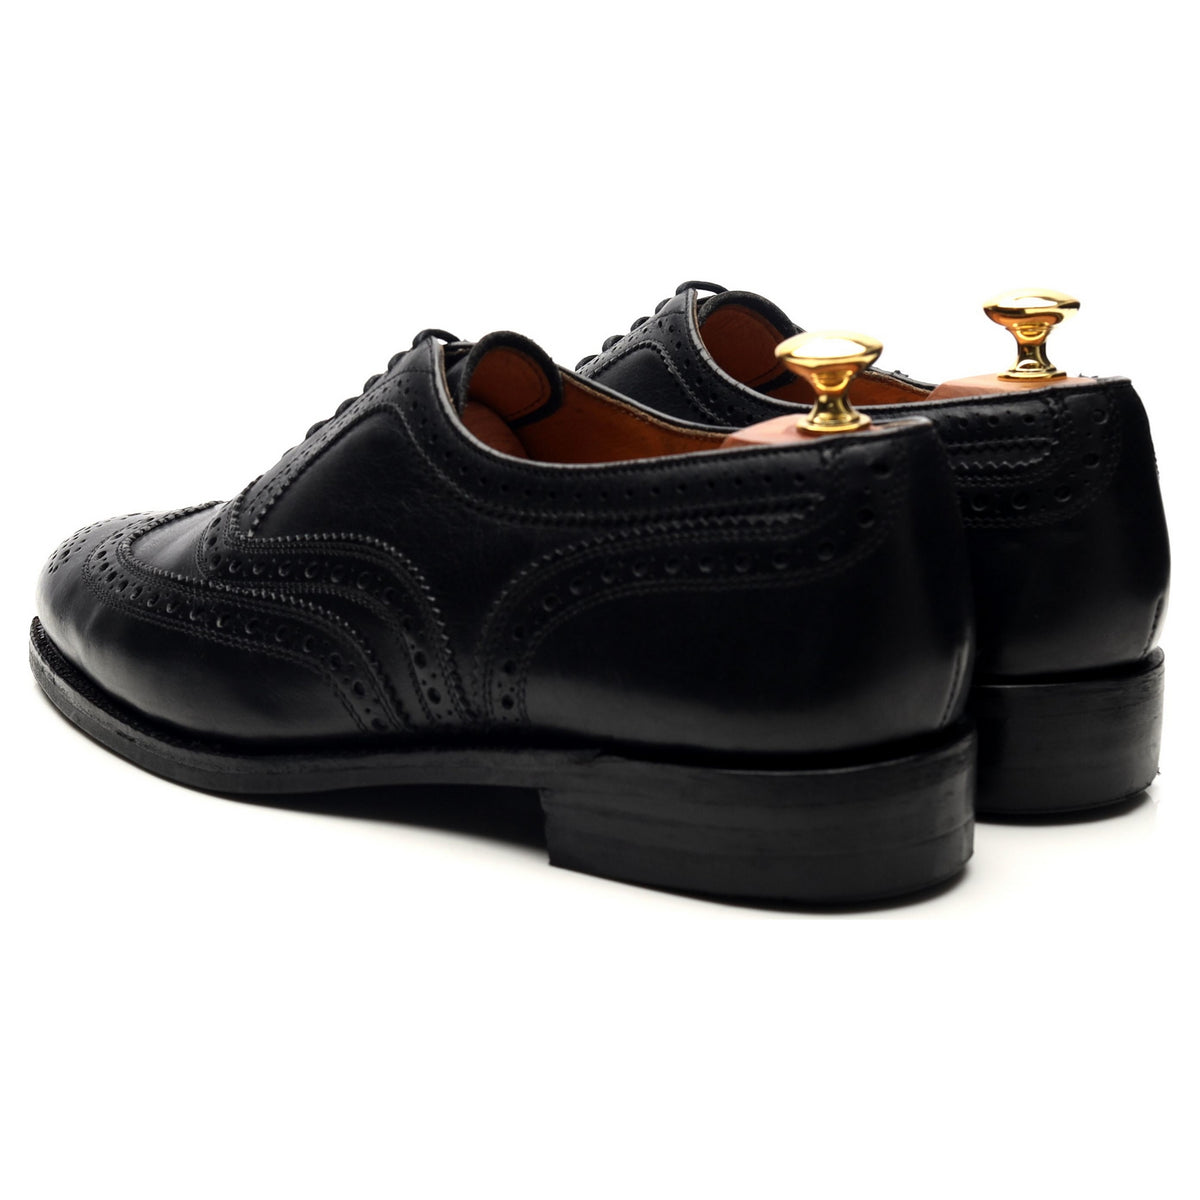 Black Leather Oxford Brogues UK 9 - Abbot's Shoes